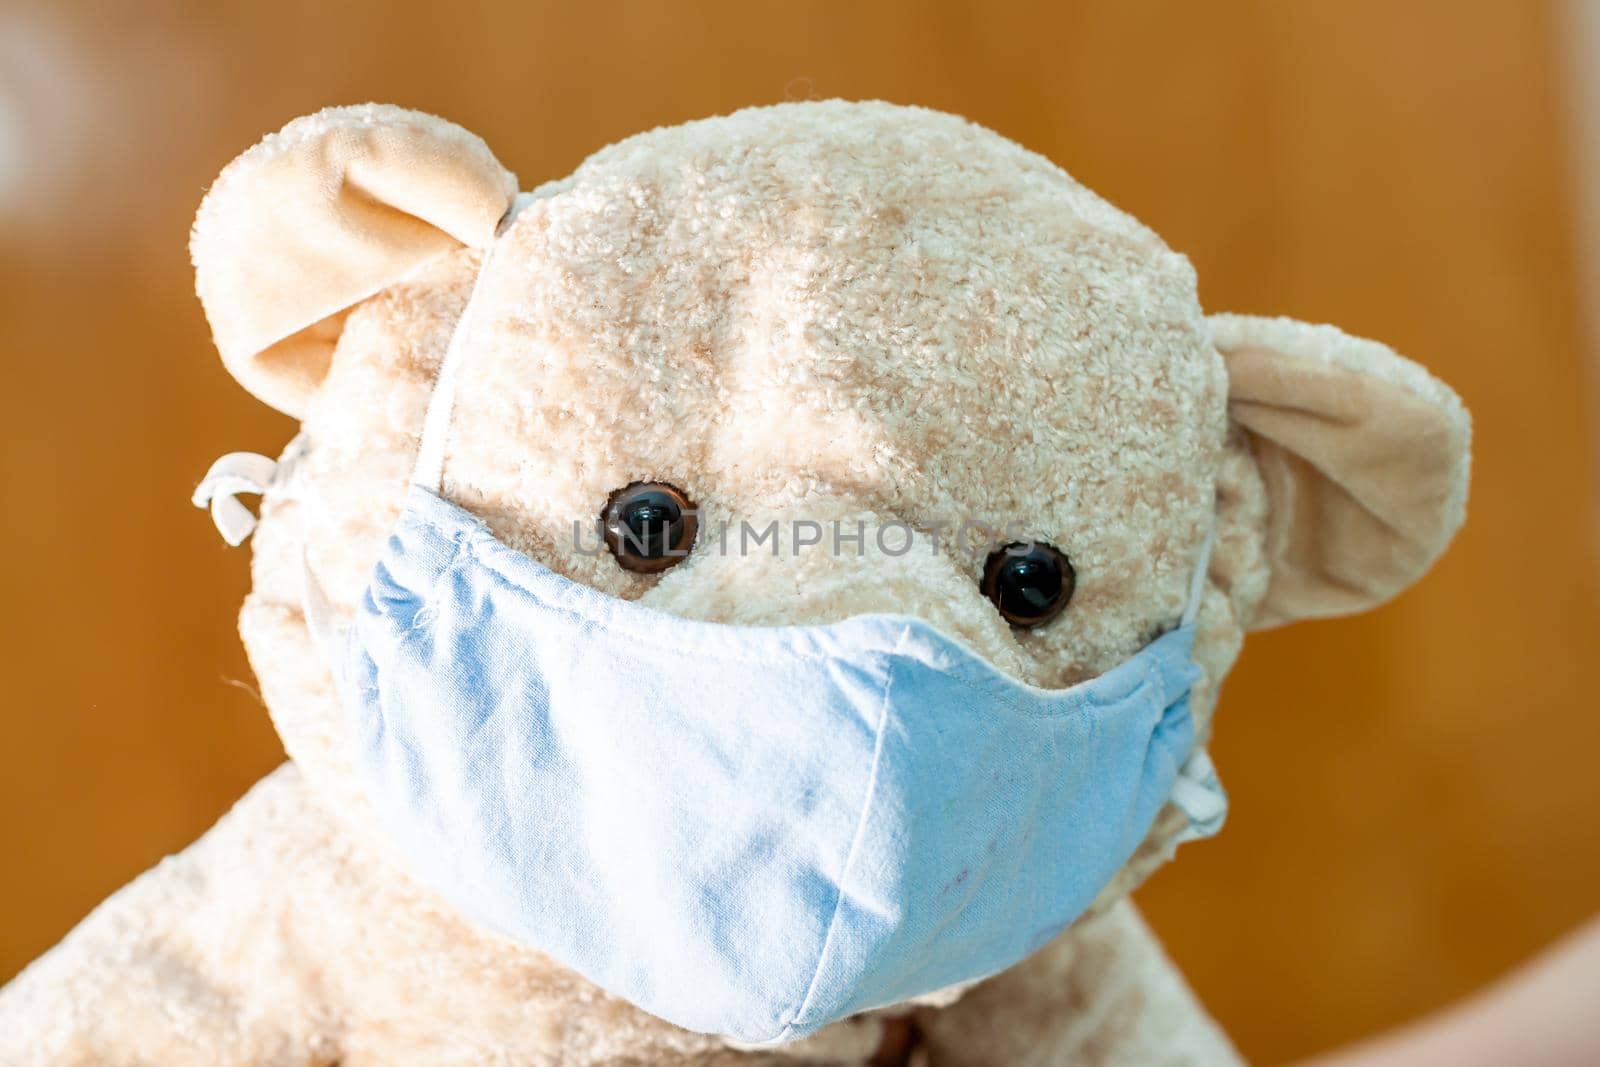 Cute Teddy bear wearing a mask - Focus on the mask.